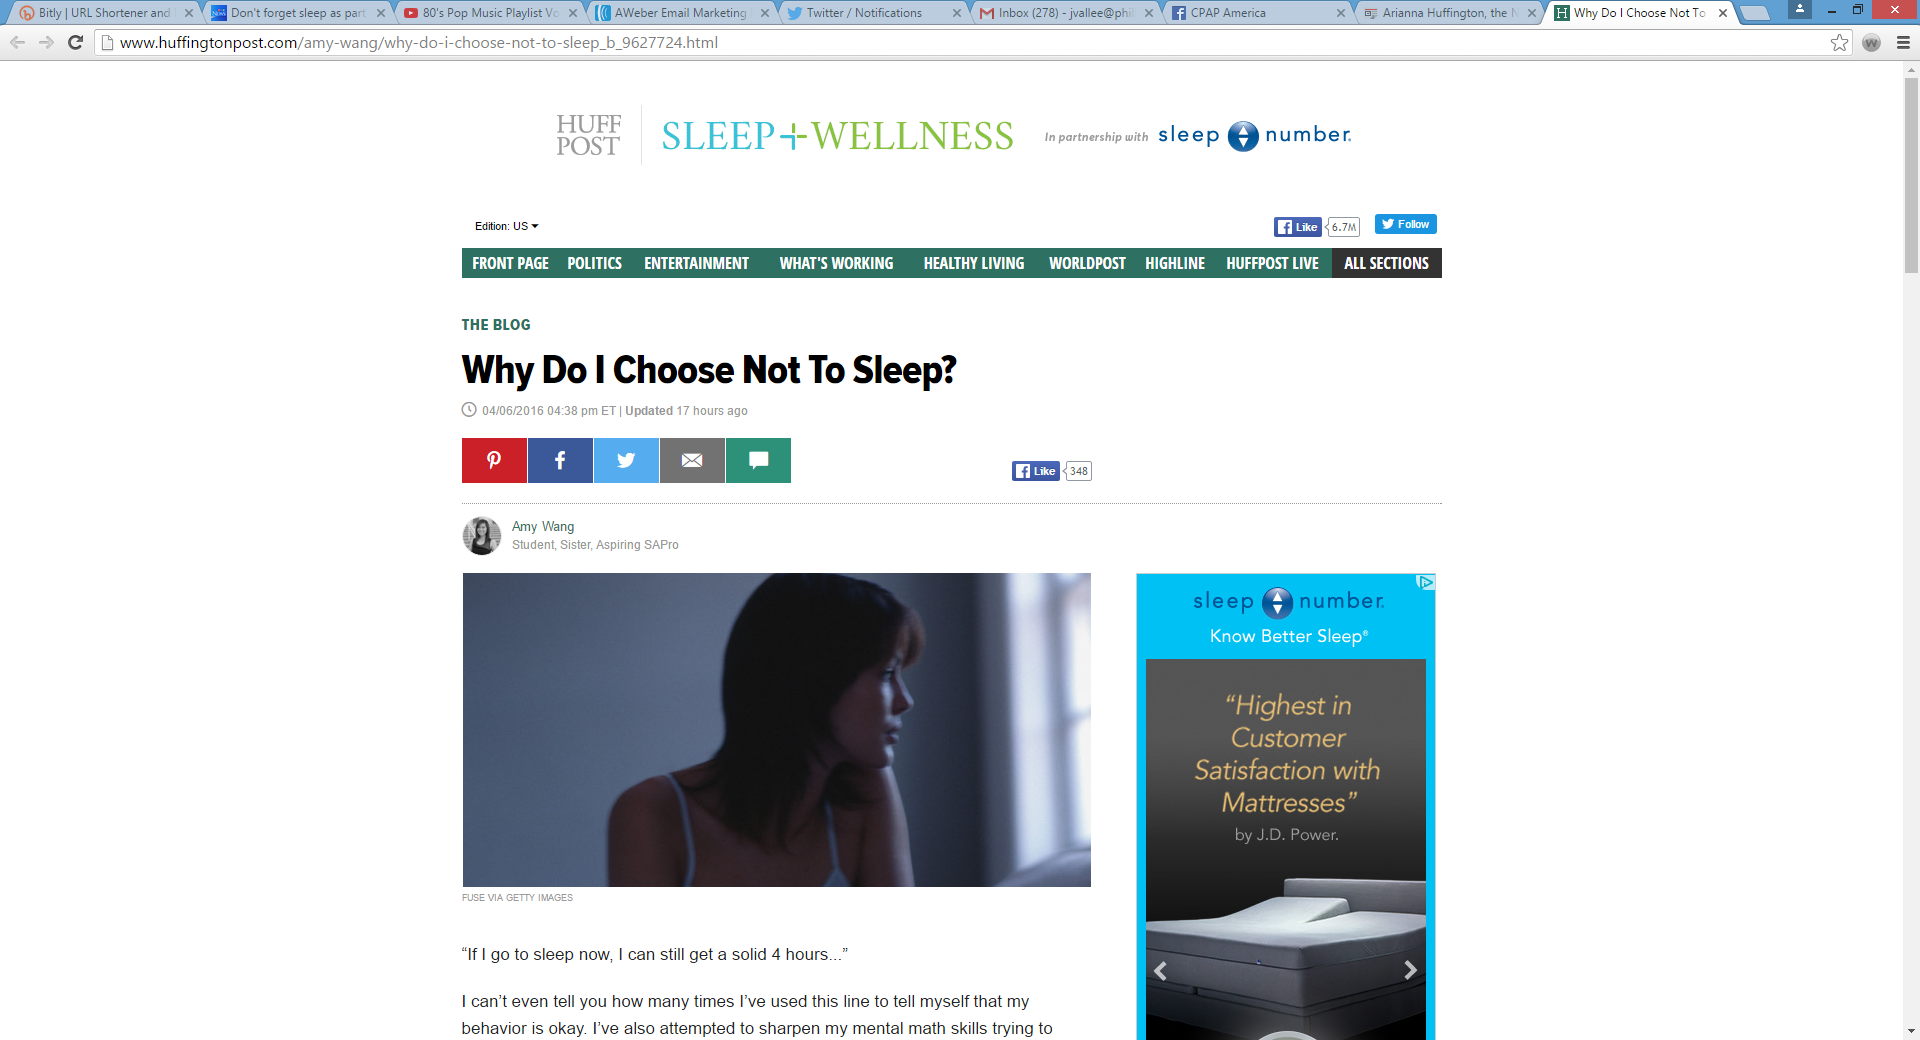 Why Don't We Make Sleep A Priority?